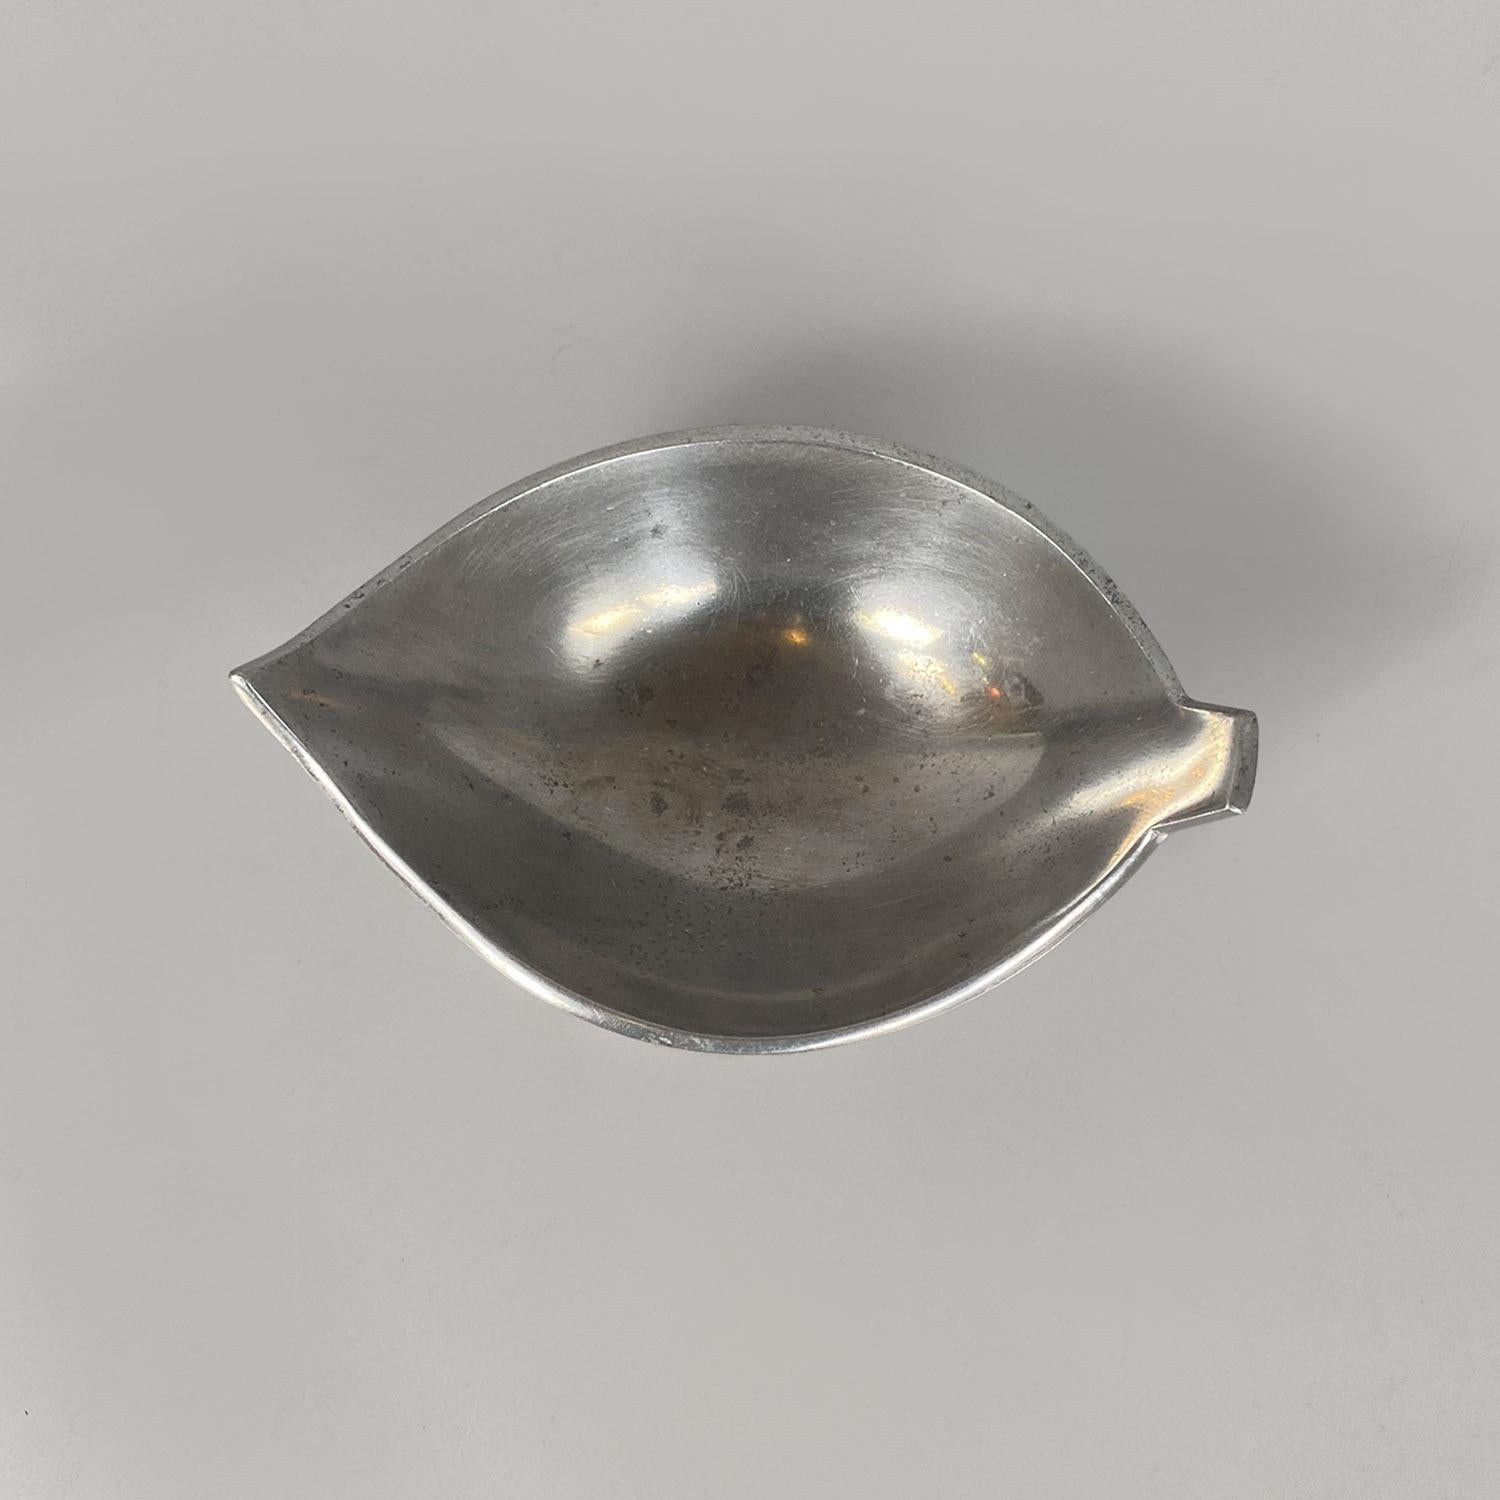 Italian modern metal irregular bowl or container cup by La Rinascente, 1990s For Sale 1